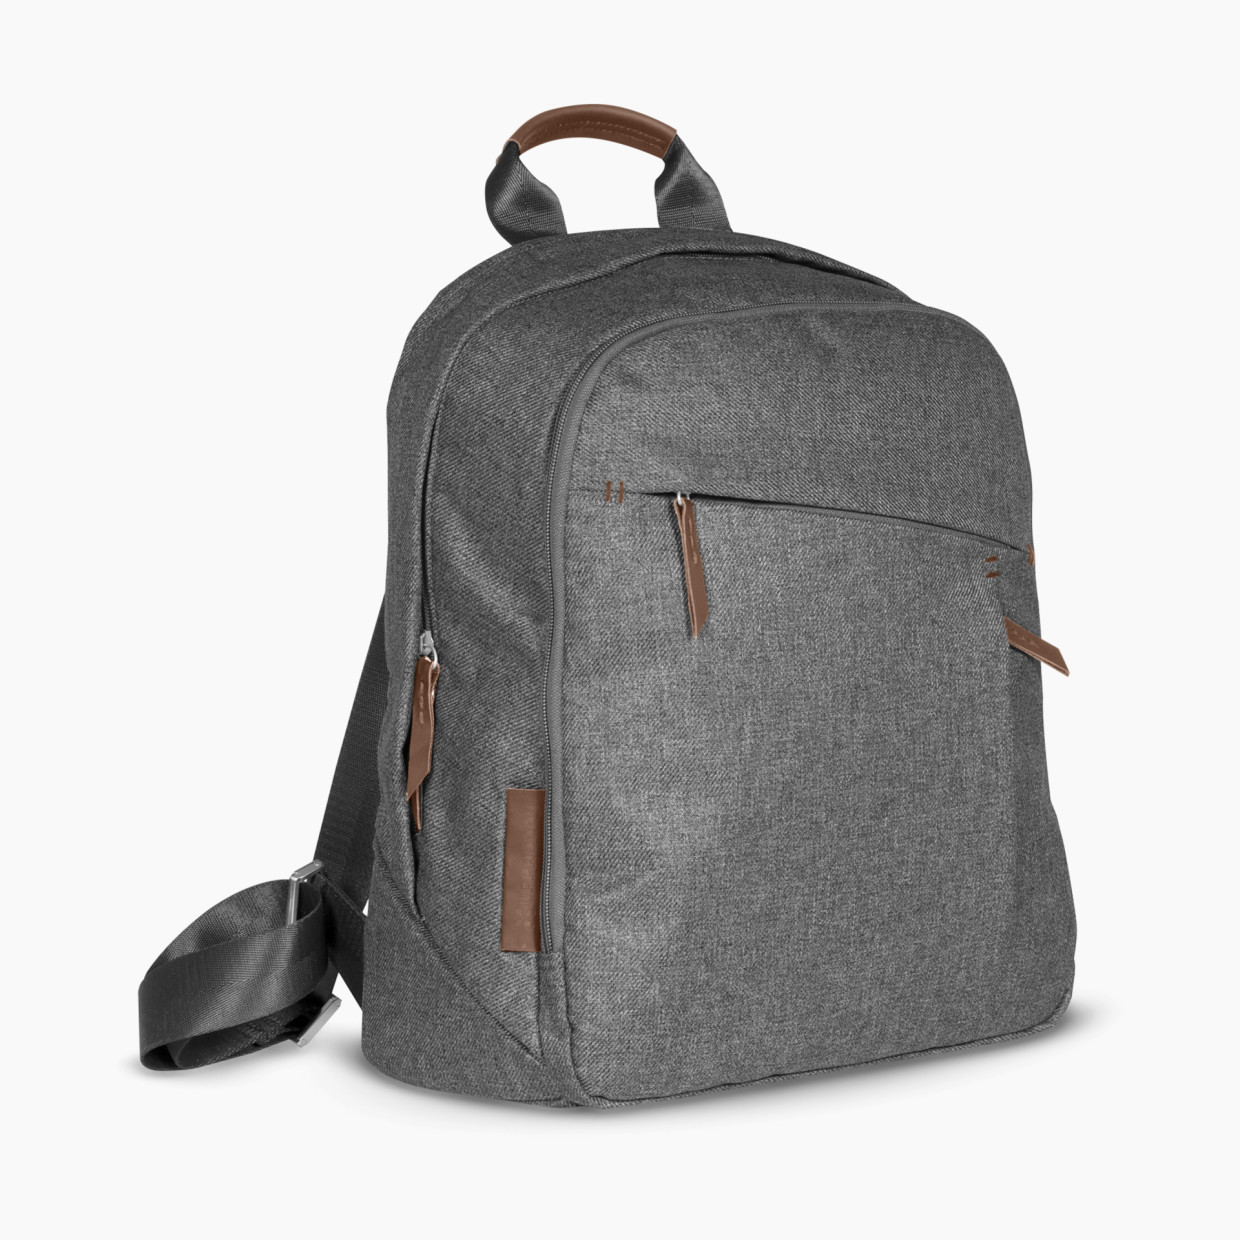 UPPAbaby Changing Backpack - Greyson.